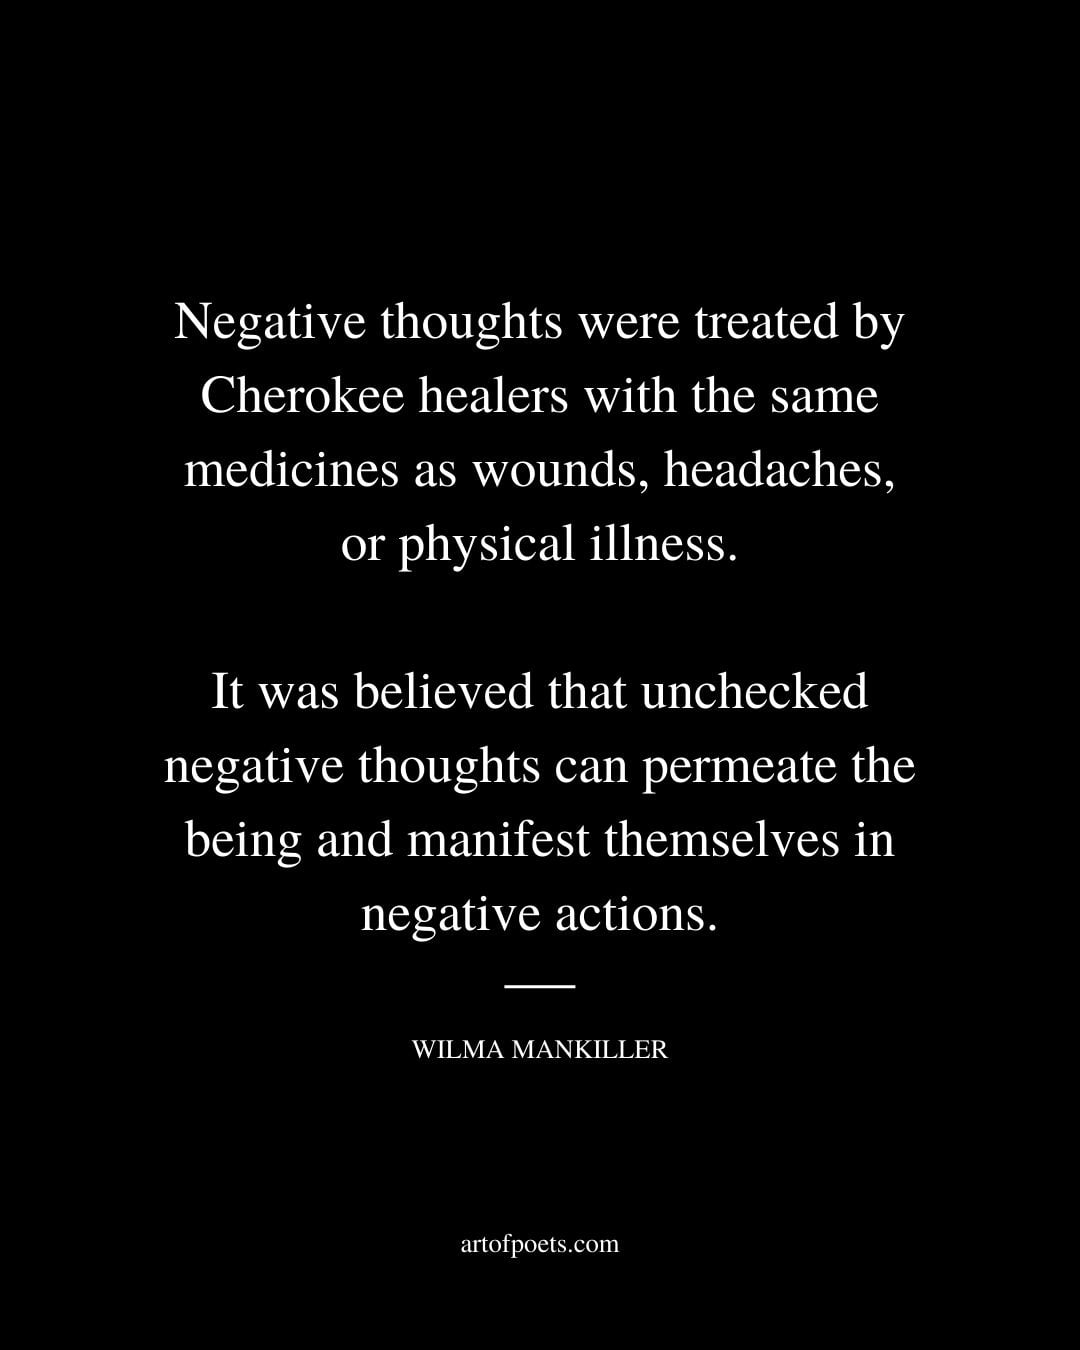 Negative thoughts were treated by Cherokee healers with the same medicines as wounds headaches or physical illness